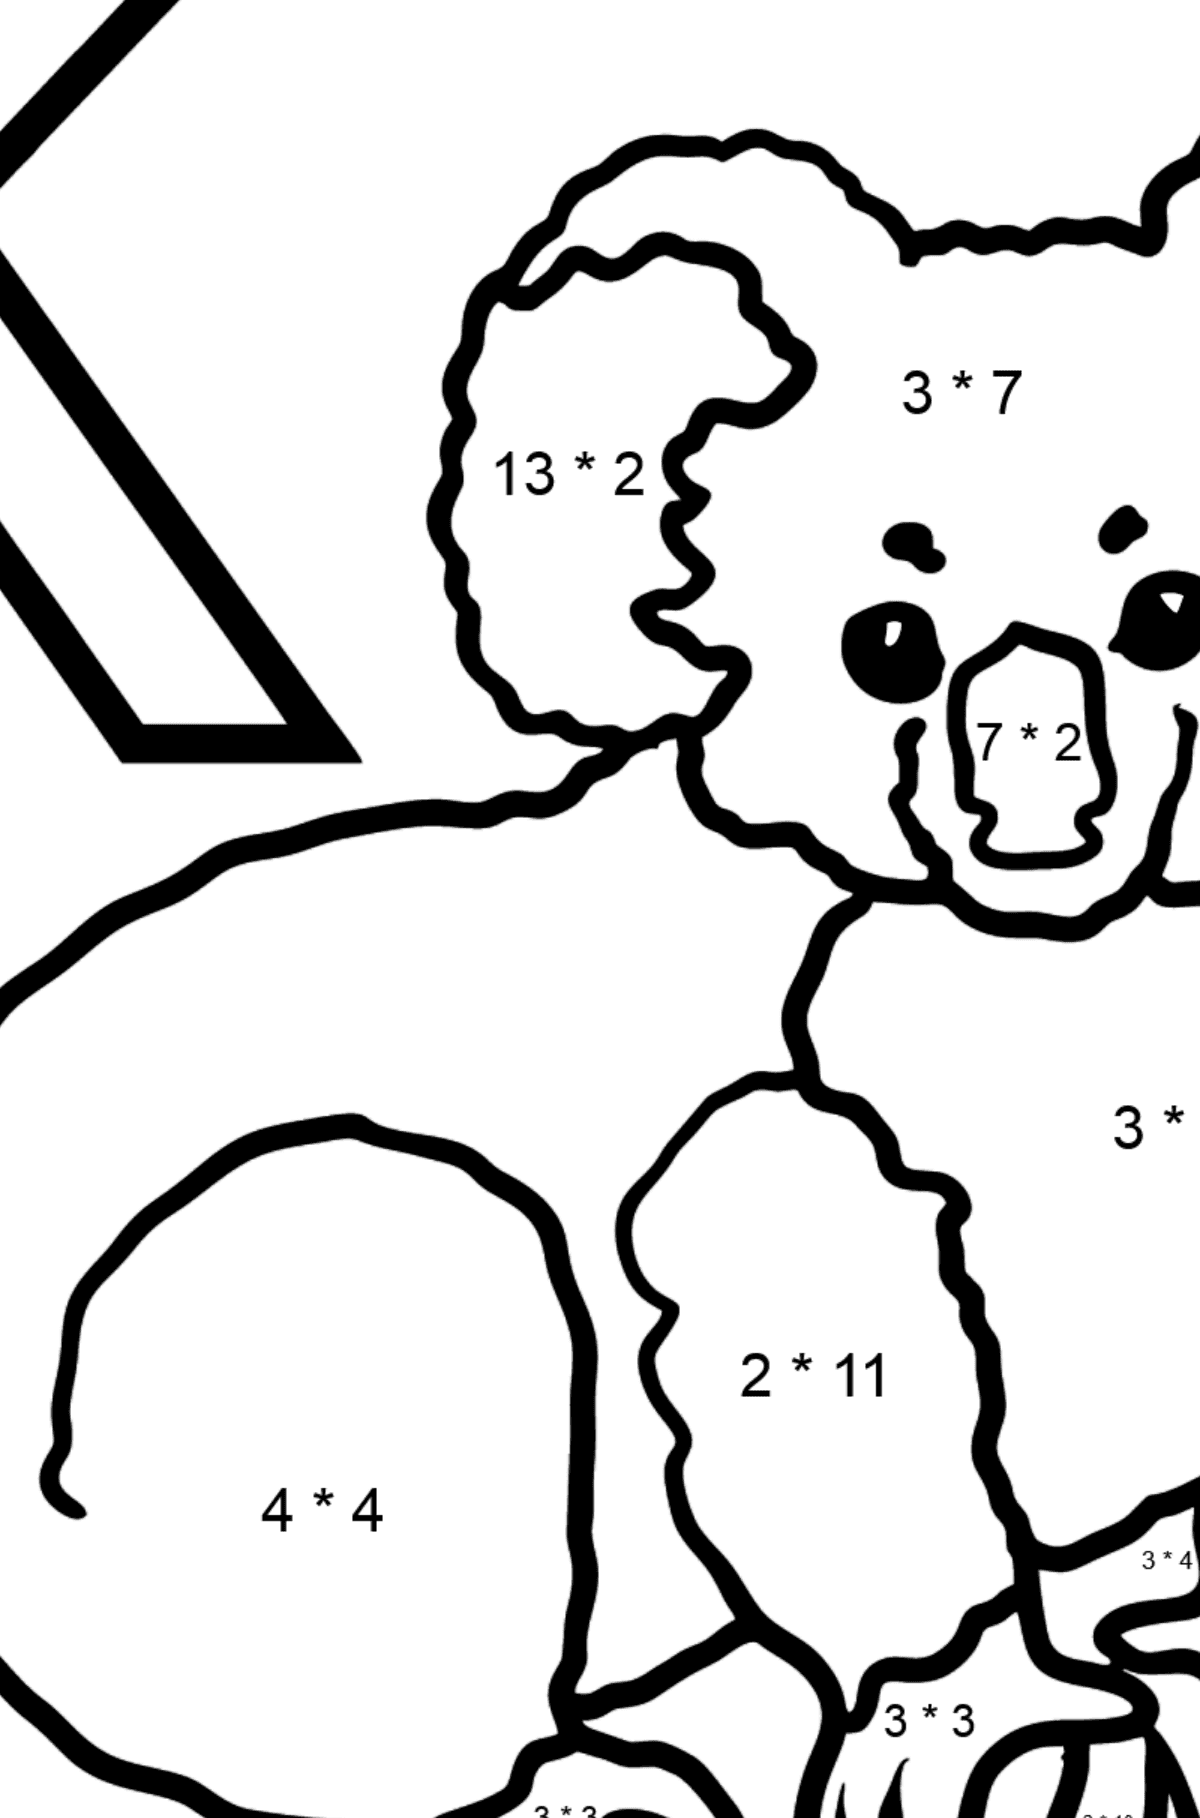 Spanish Letter K coloring pages - KOALA - Math Coloring - Multiplication for Kids